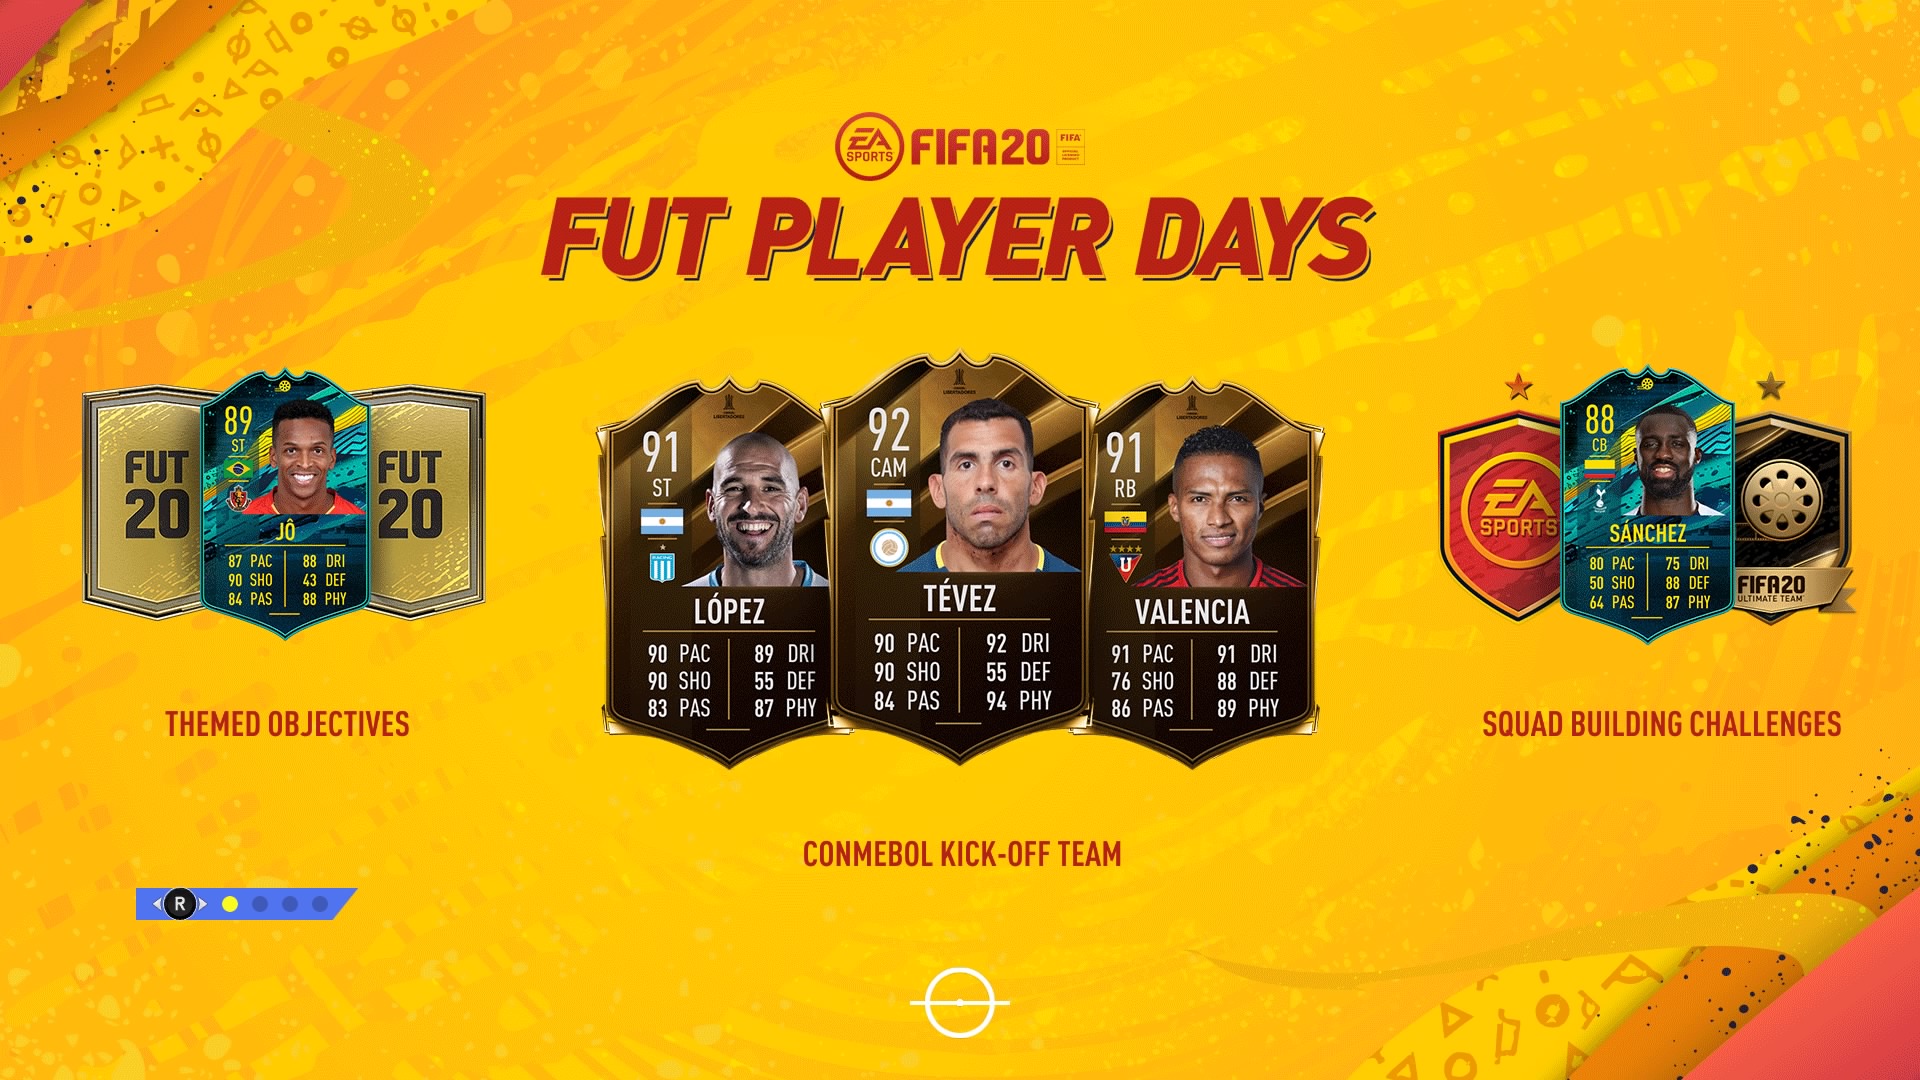 Fifa Fut Player Days Guide How To Get Free Packs And Upgrades Of Tevez And Davinson Sanchez Gamesradar